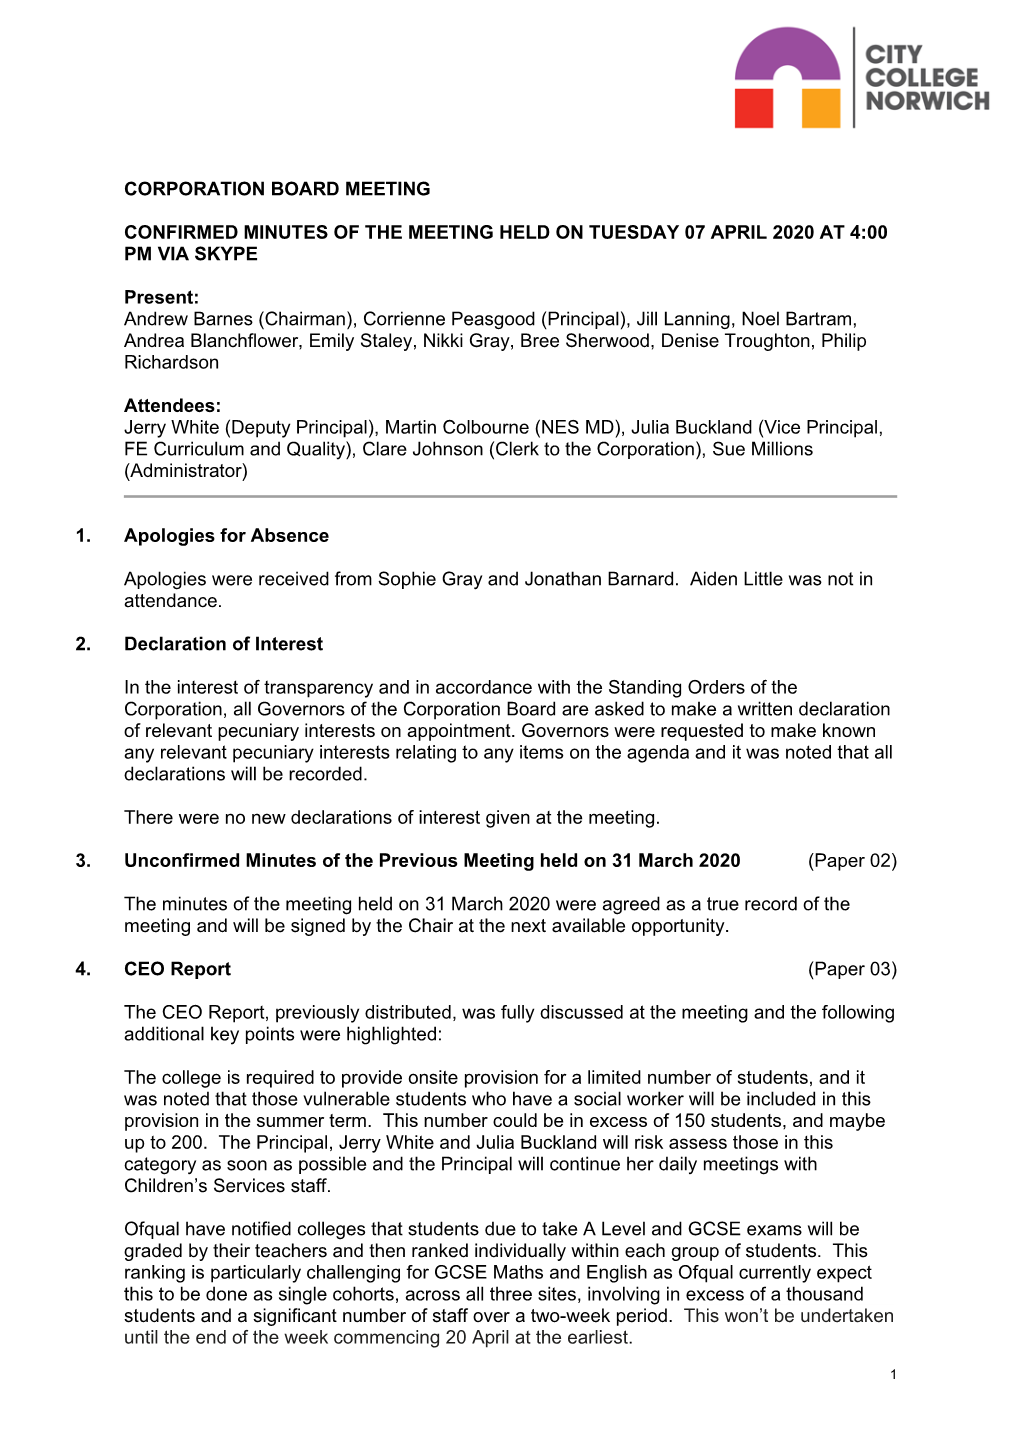 Minutes of the Board Meeting 07.04.2020